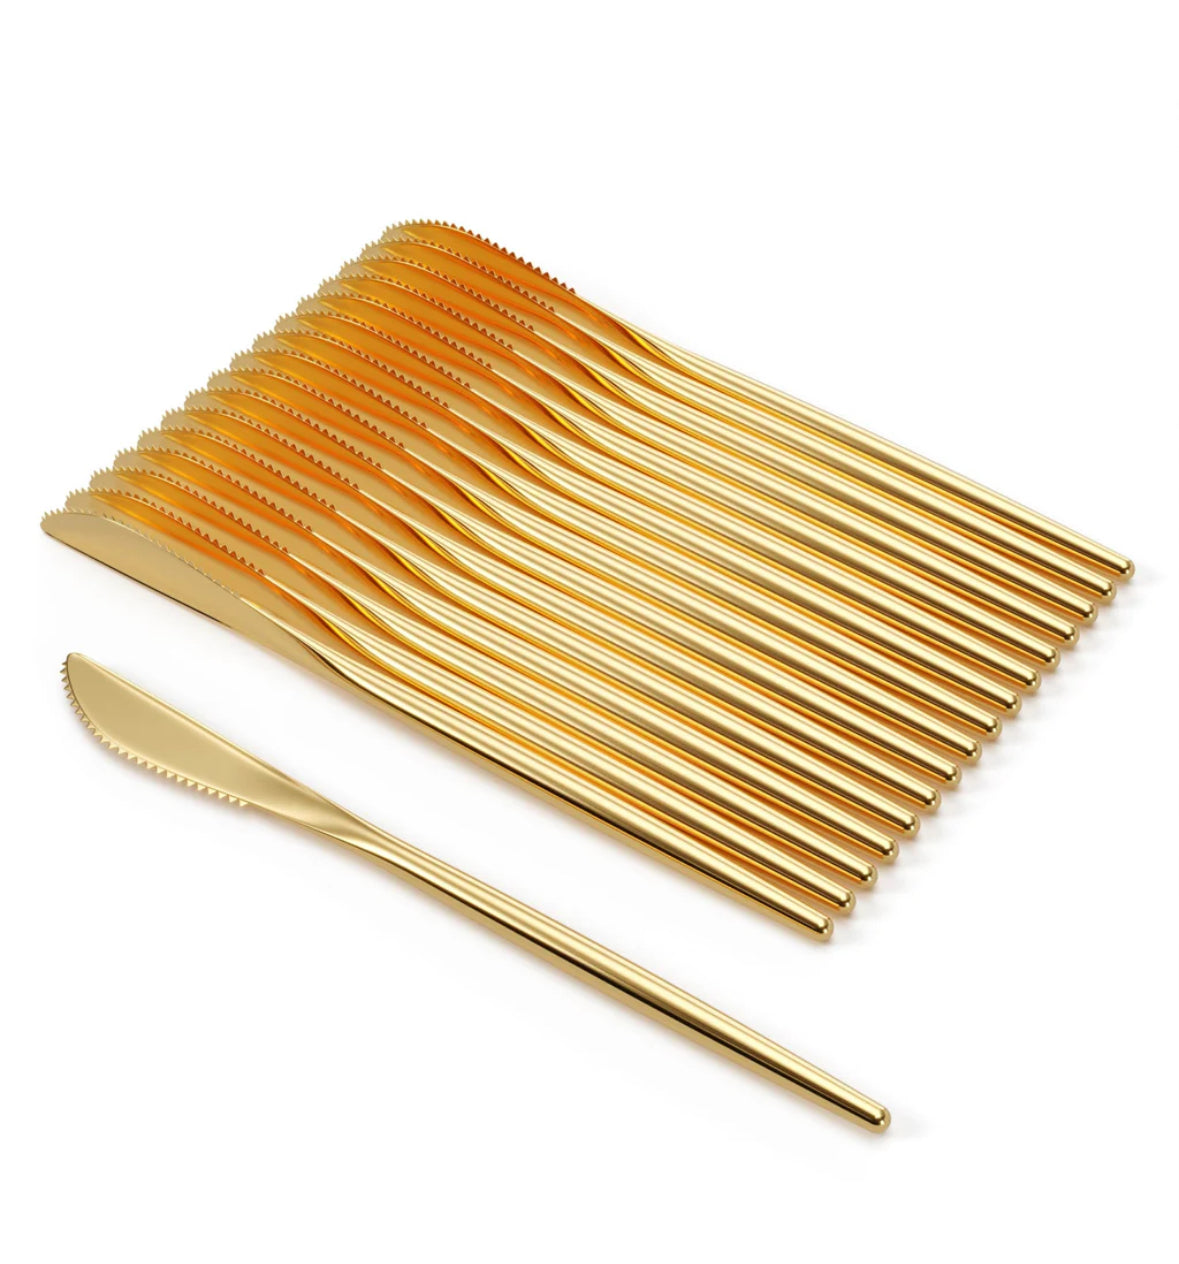 Trendables Gloss Gold Plastic Knives (20 Ct)